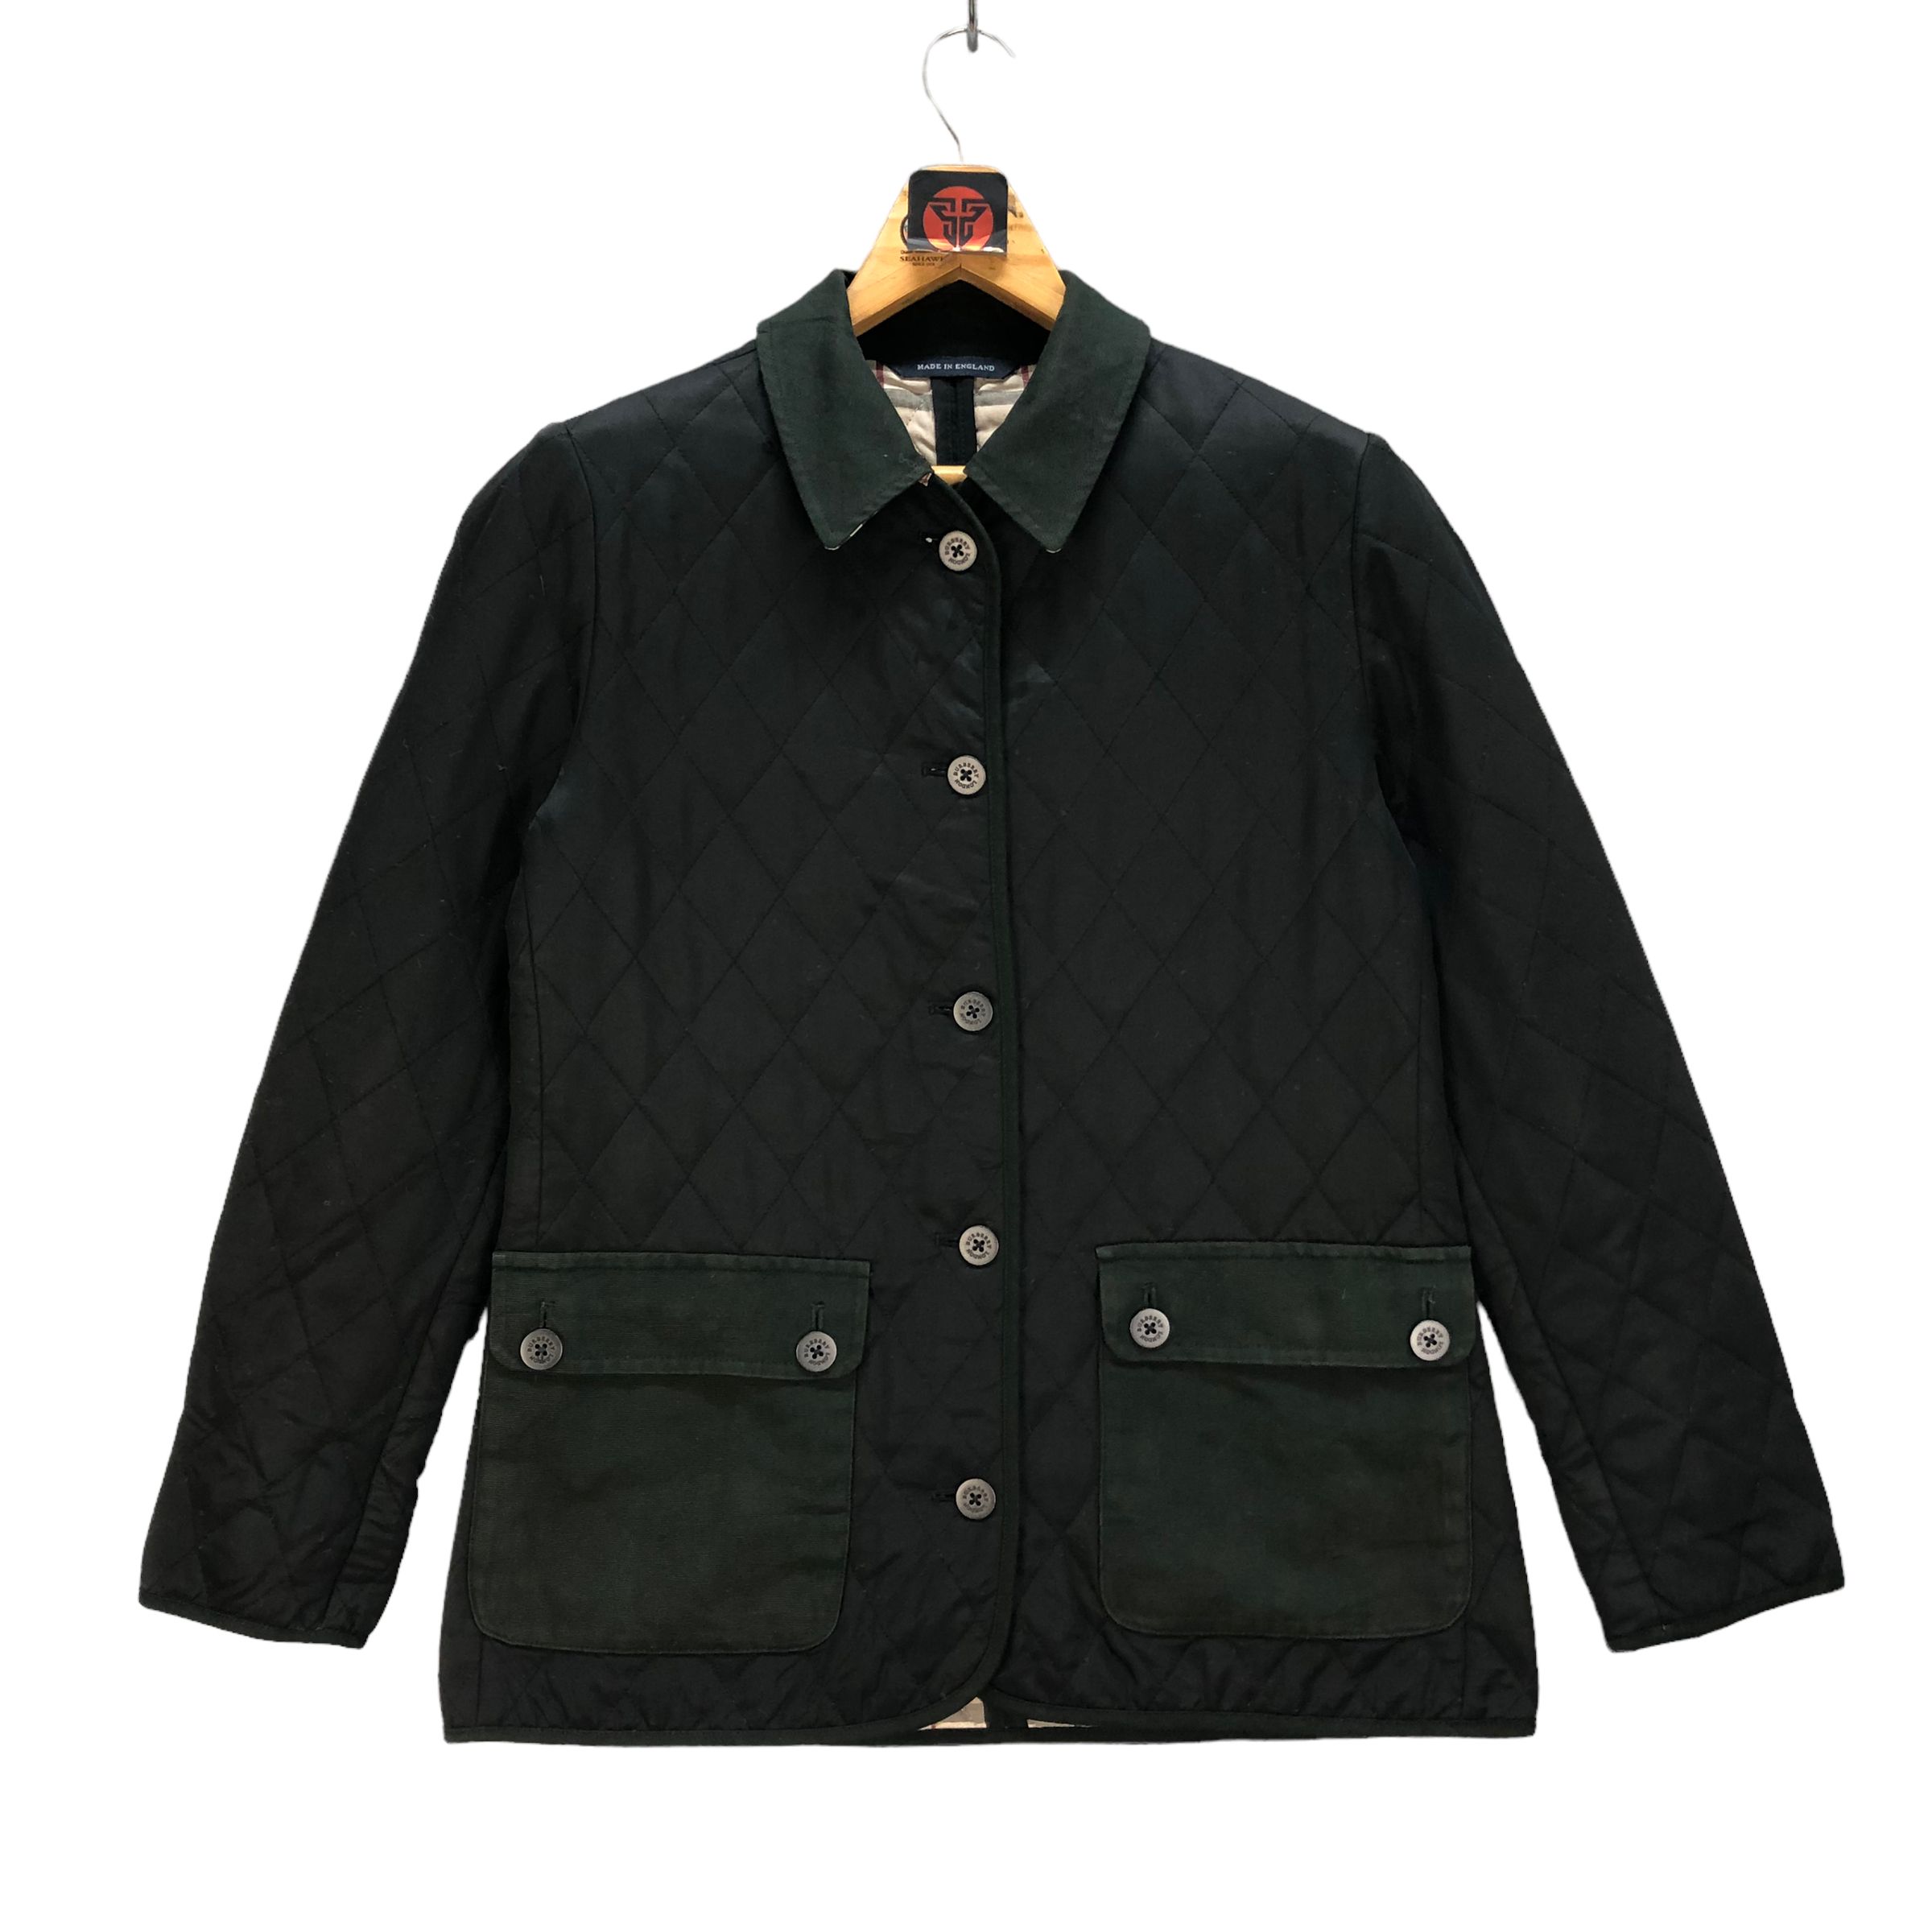 BURBERRY LONDON NOVA CHECK QUILTED JACKET #7238-120 - 1